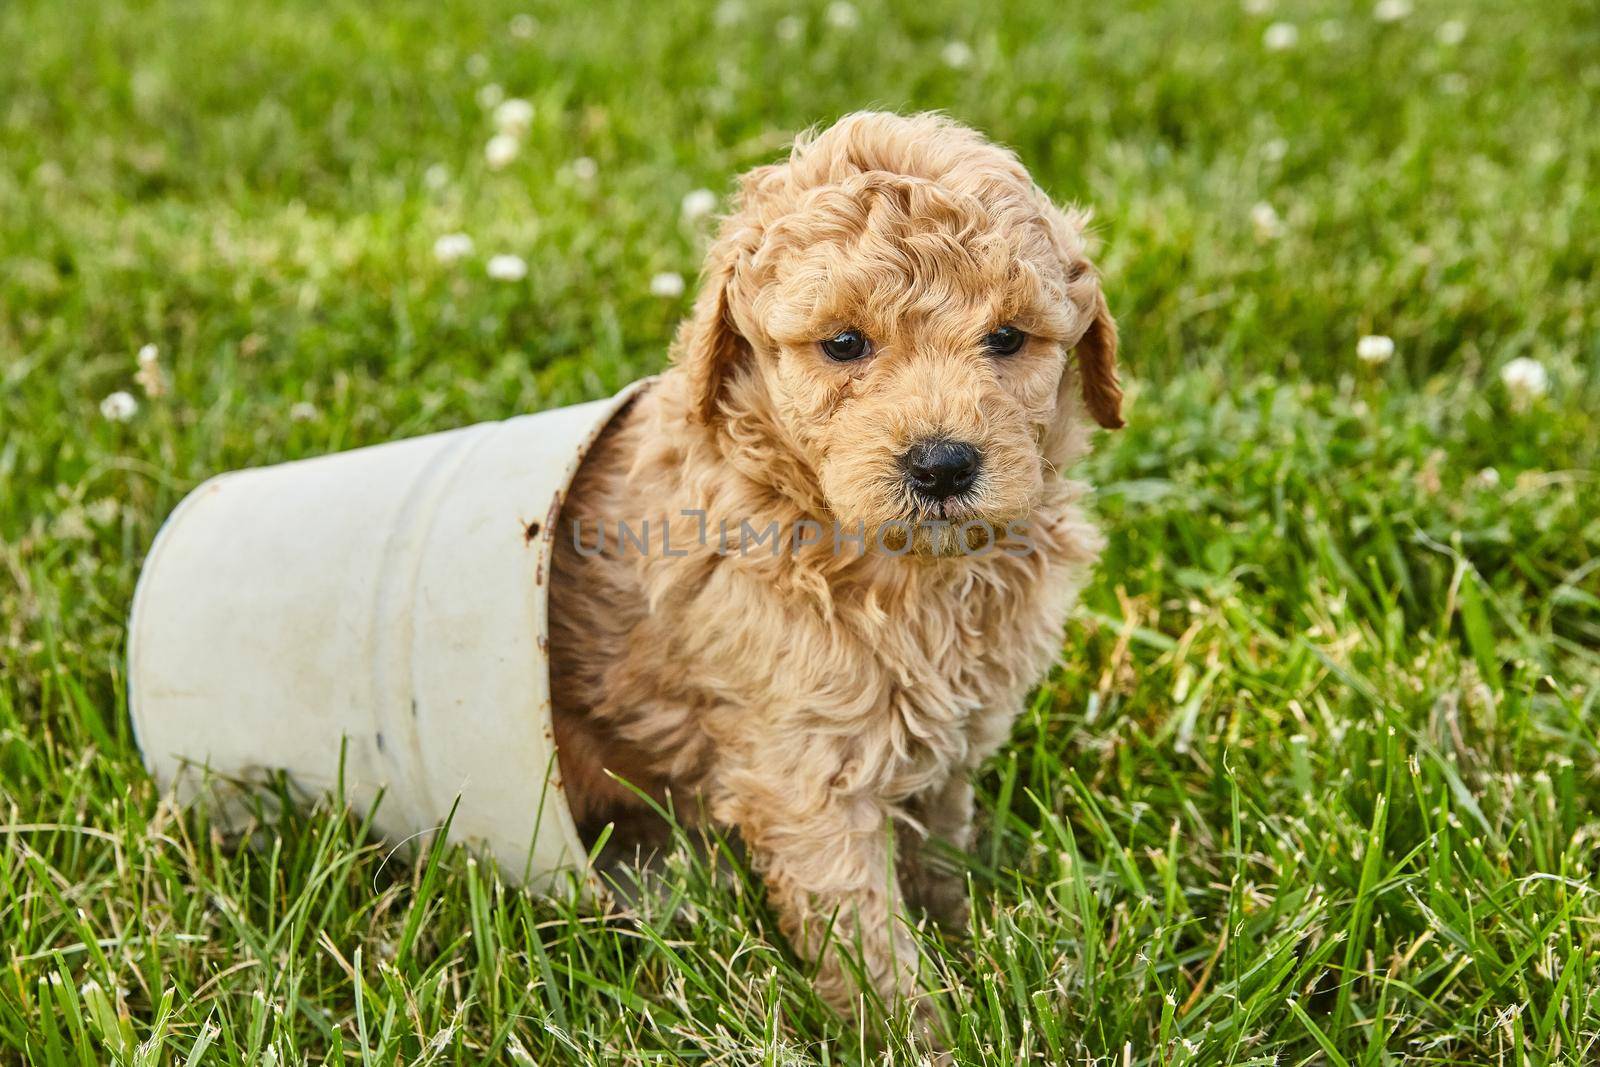 Image of Adorable Goldendoodle puppy sitting inside small pot